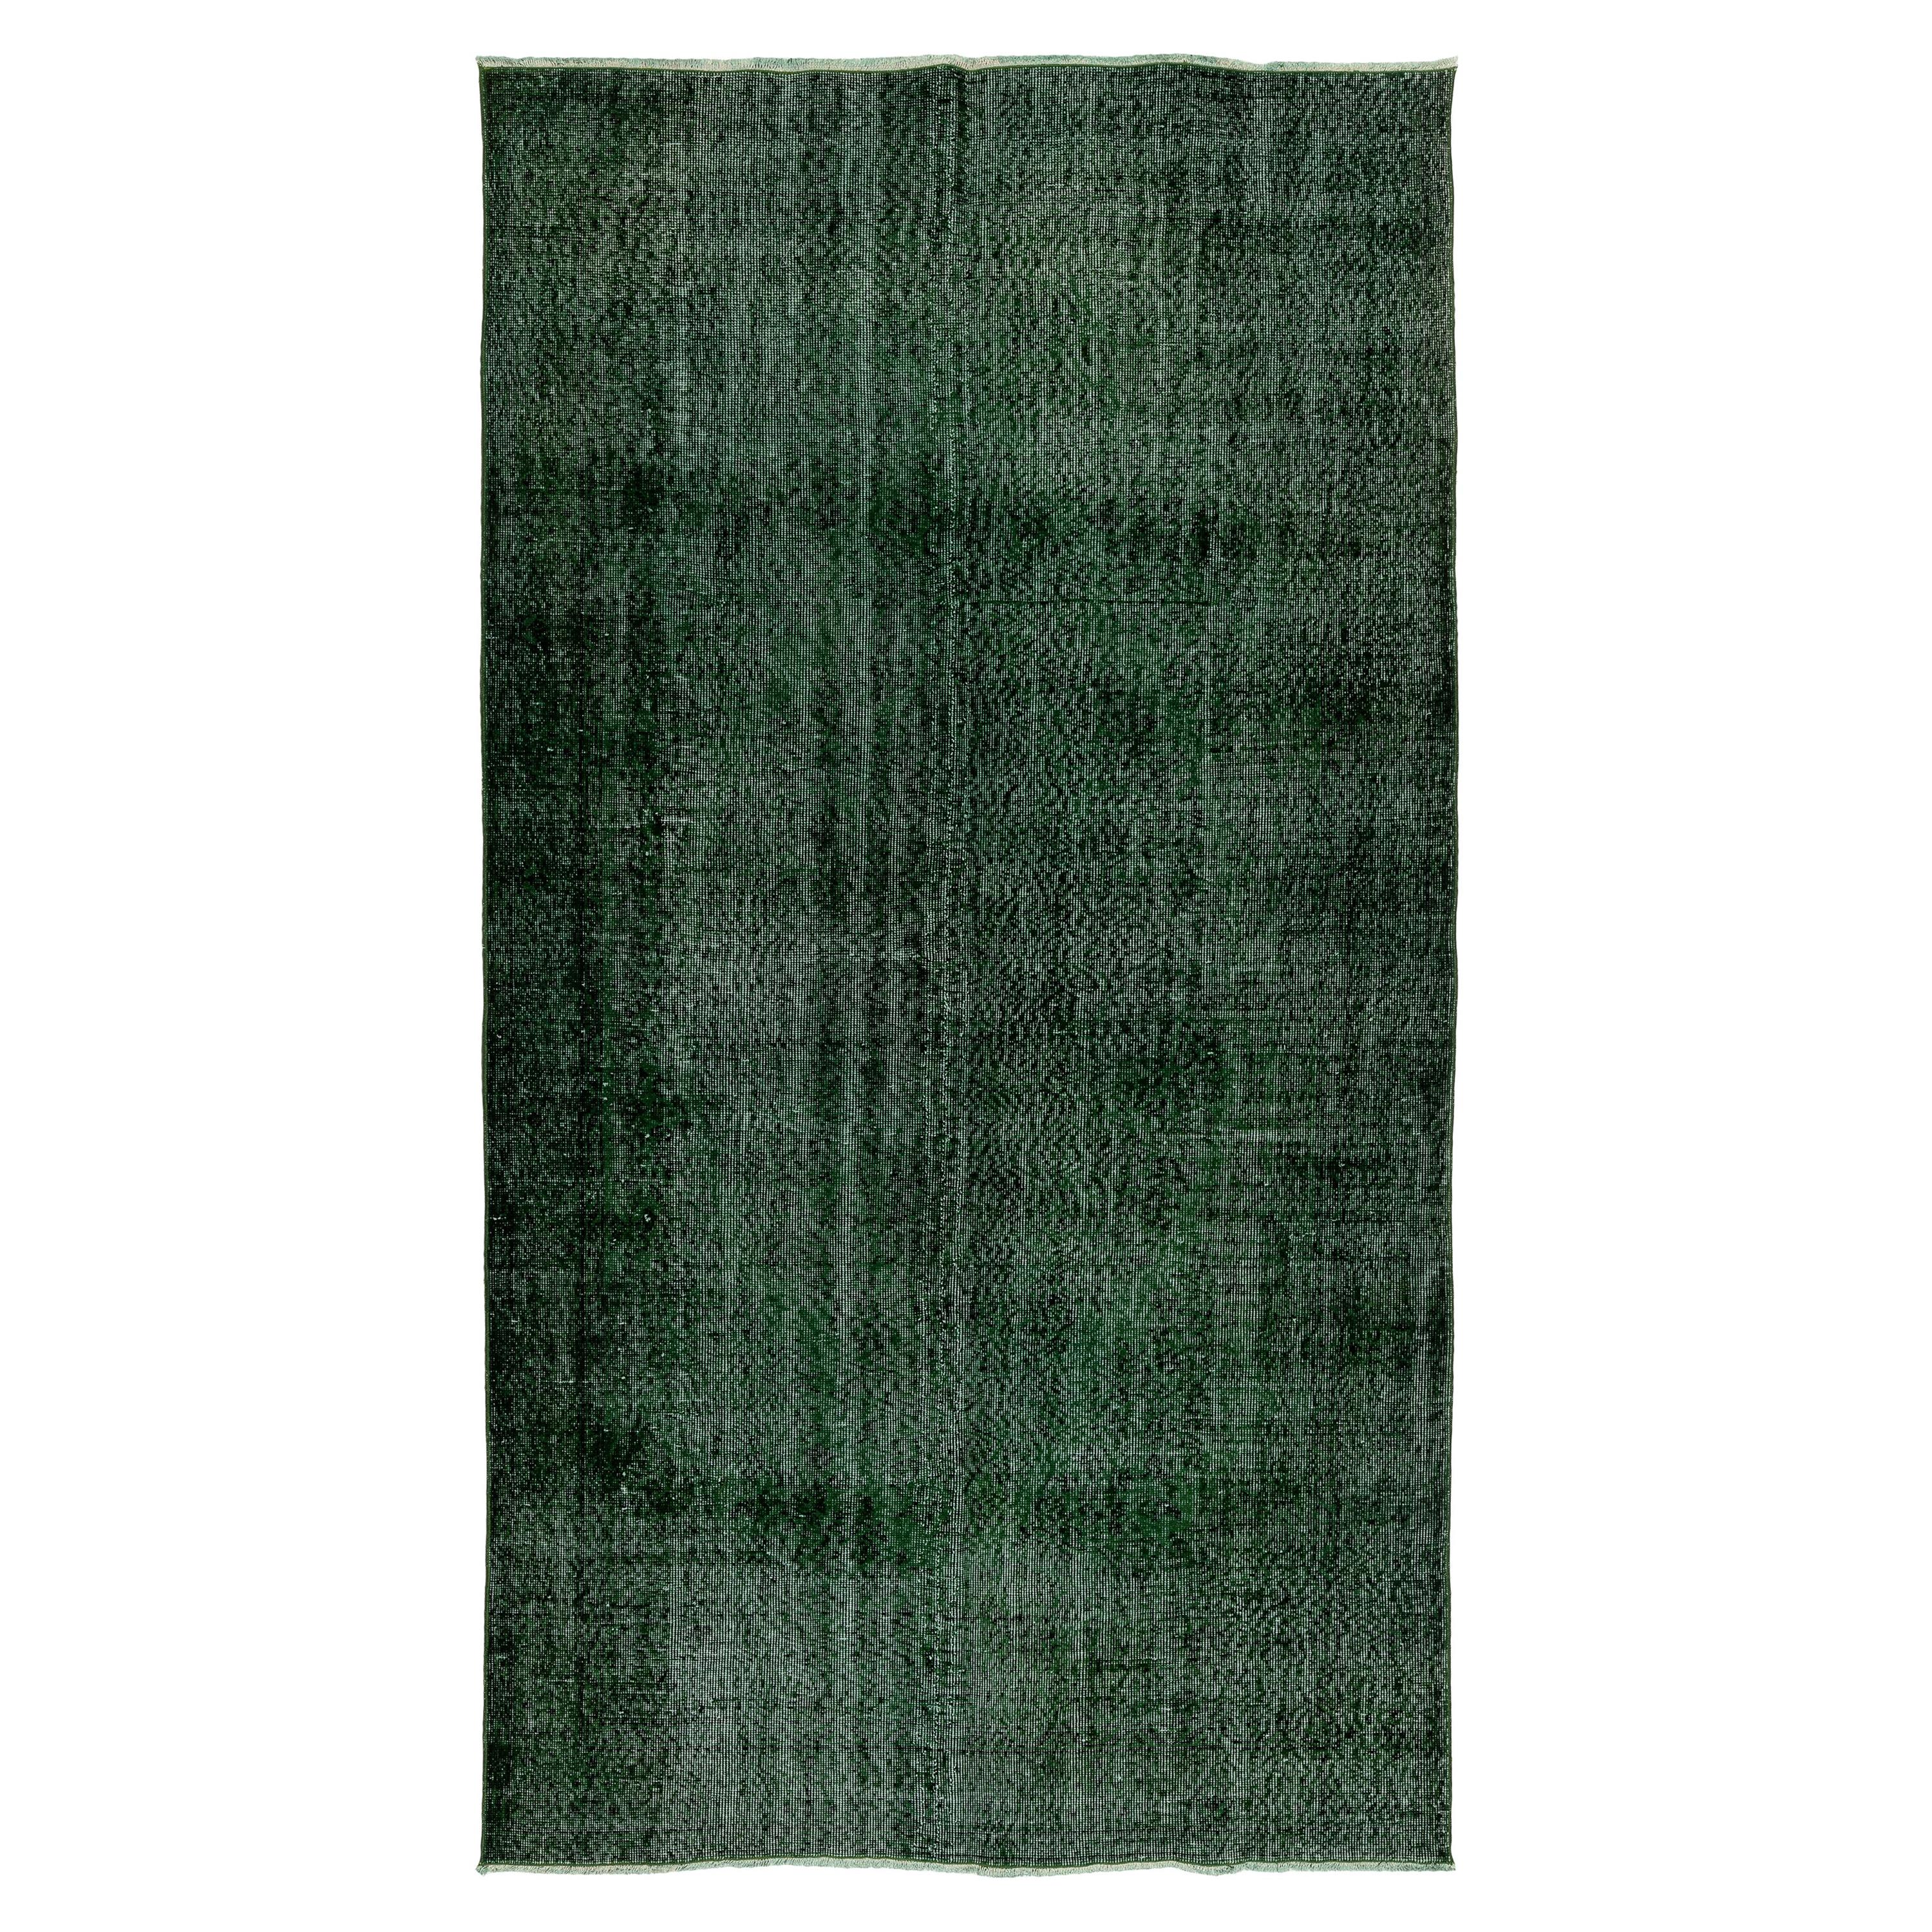 6x10.2 Ft Hand-Knotted Vintage Turkish Rug 4 Modern Interiors Over-Dyed in Green